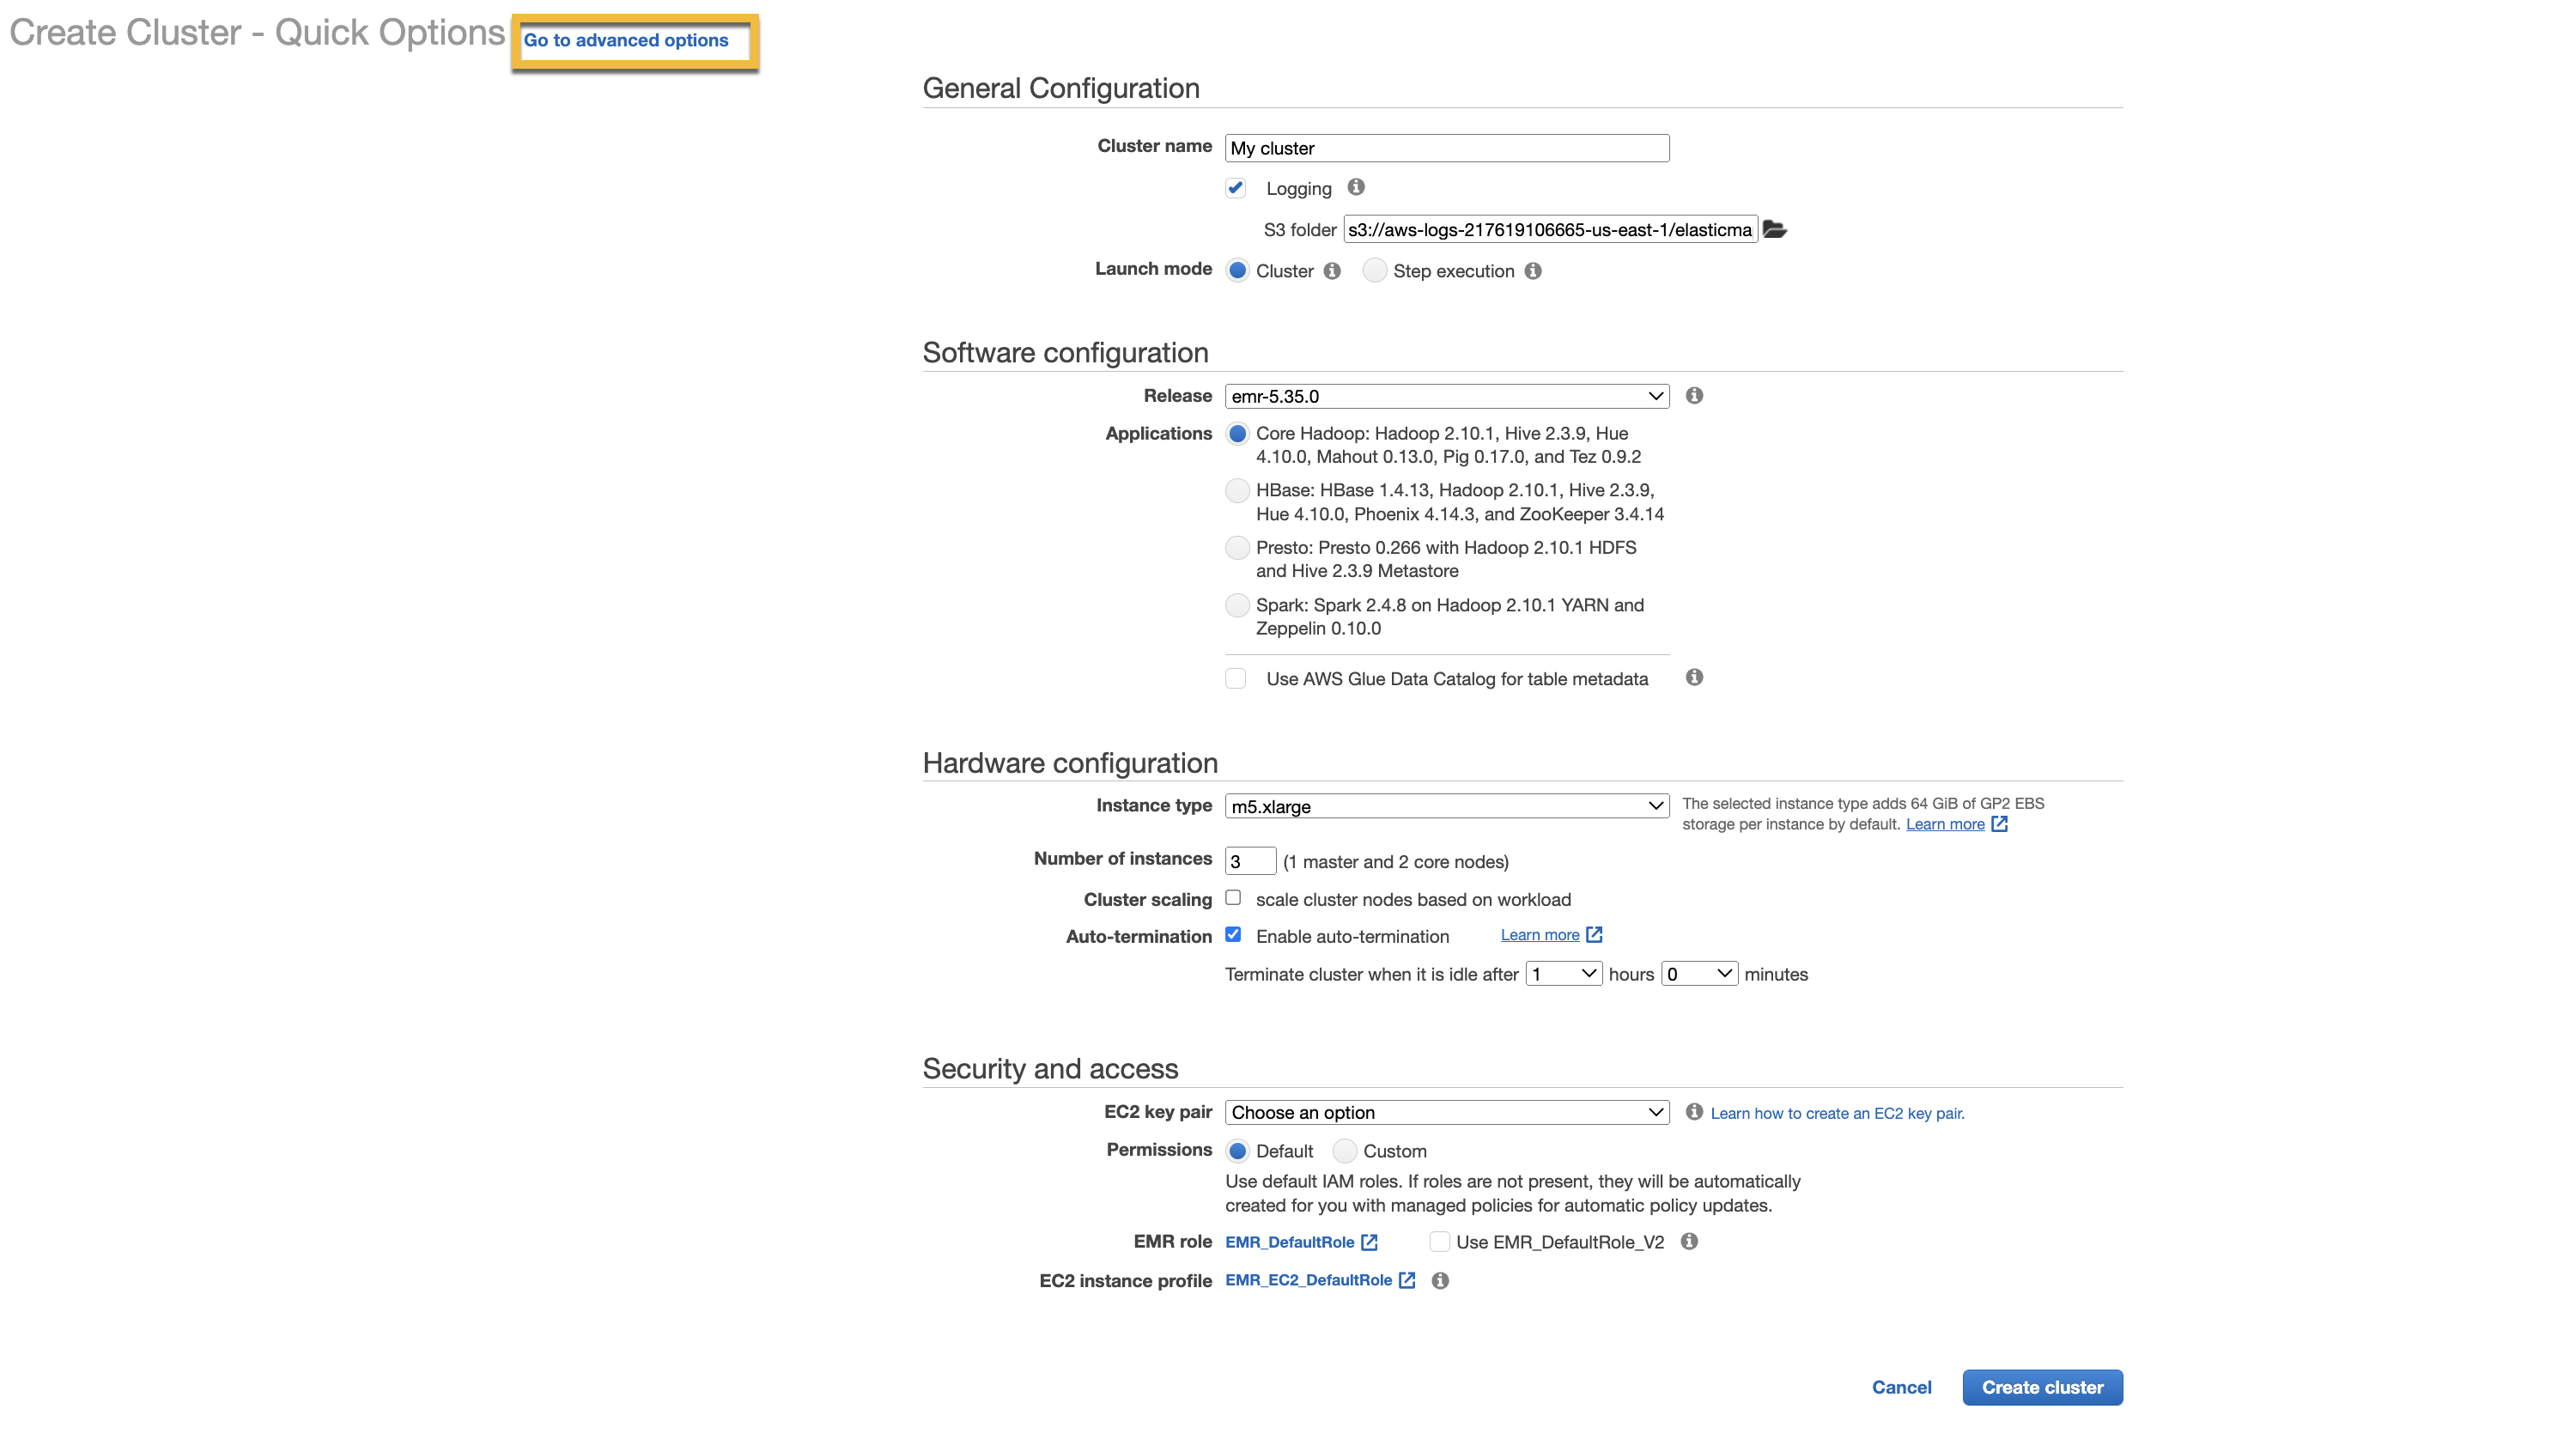 aws-_marketplace-_step2-_create-cluster.png